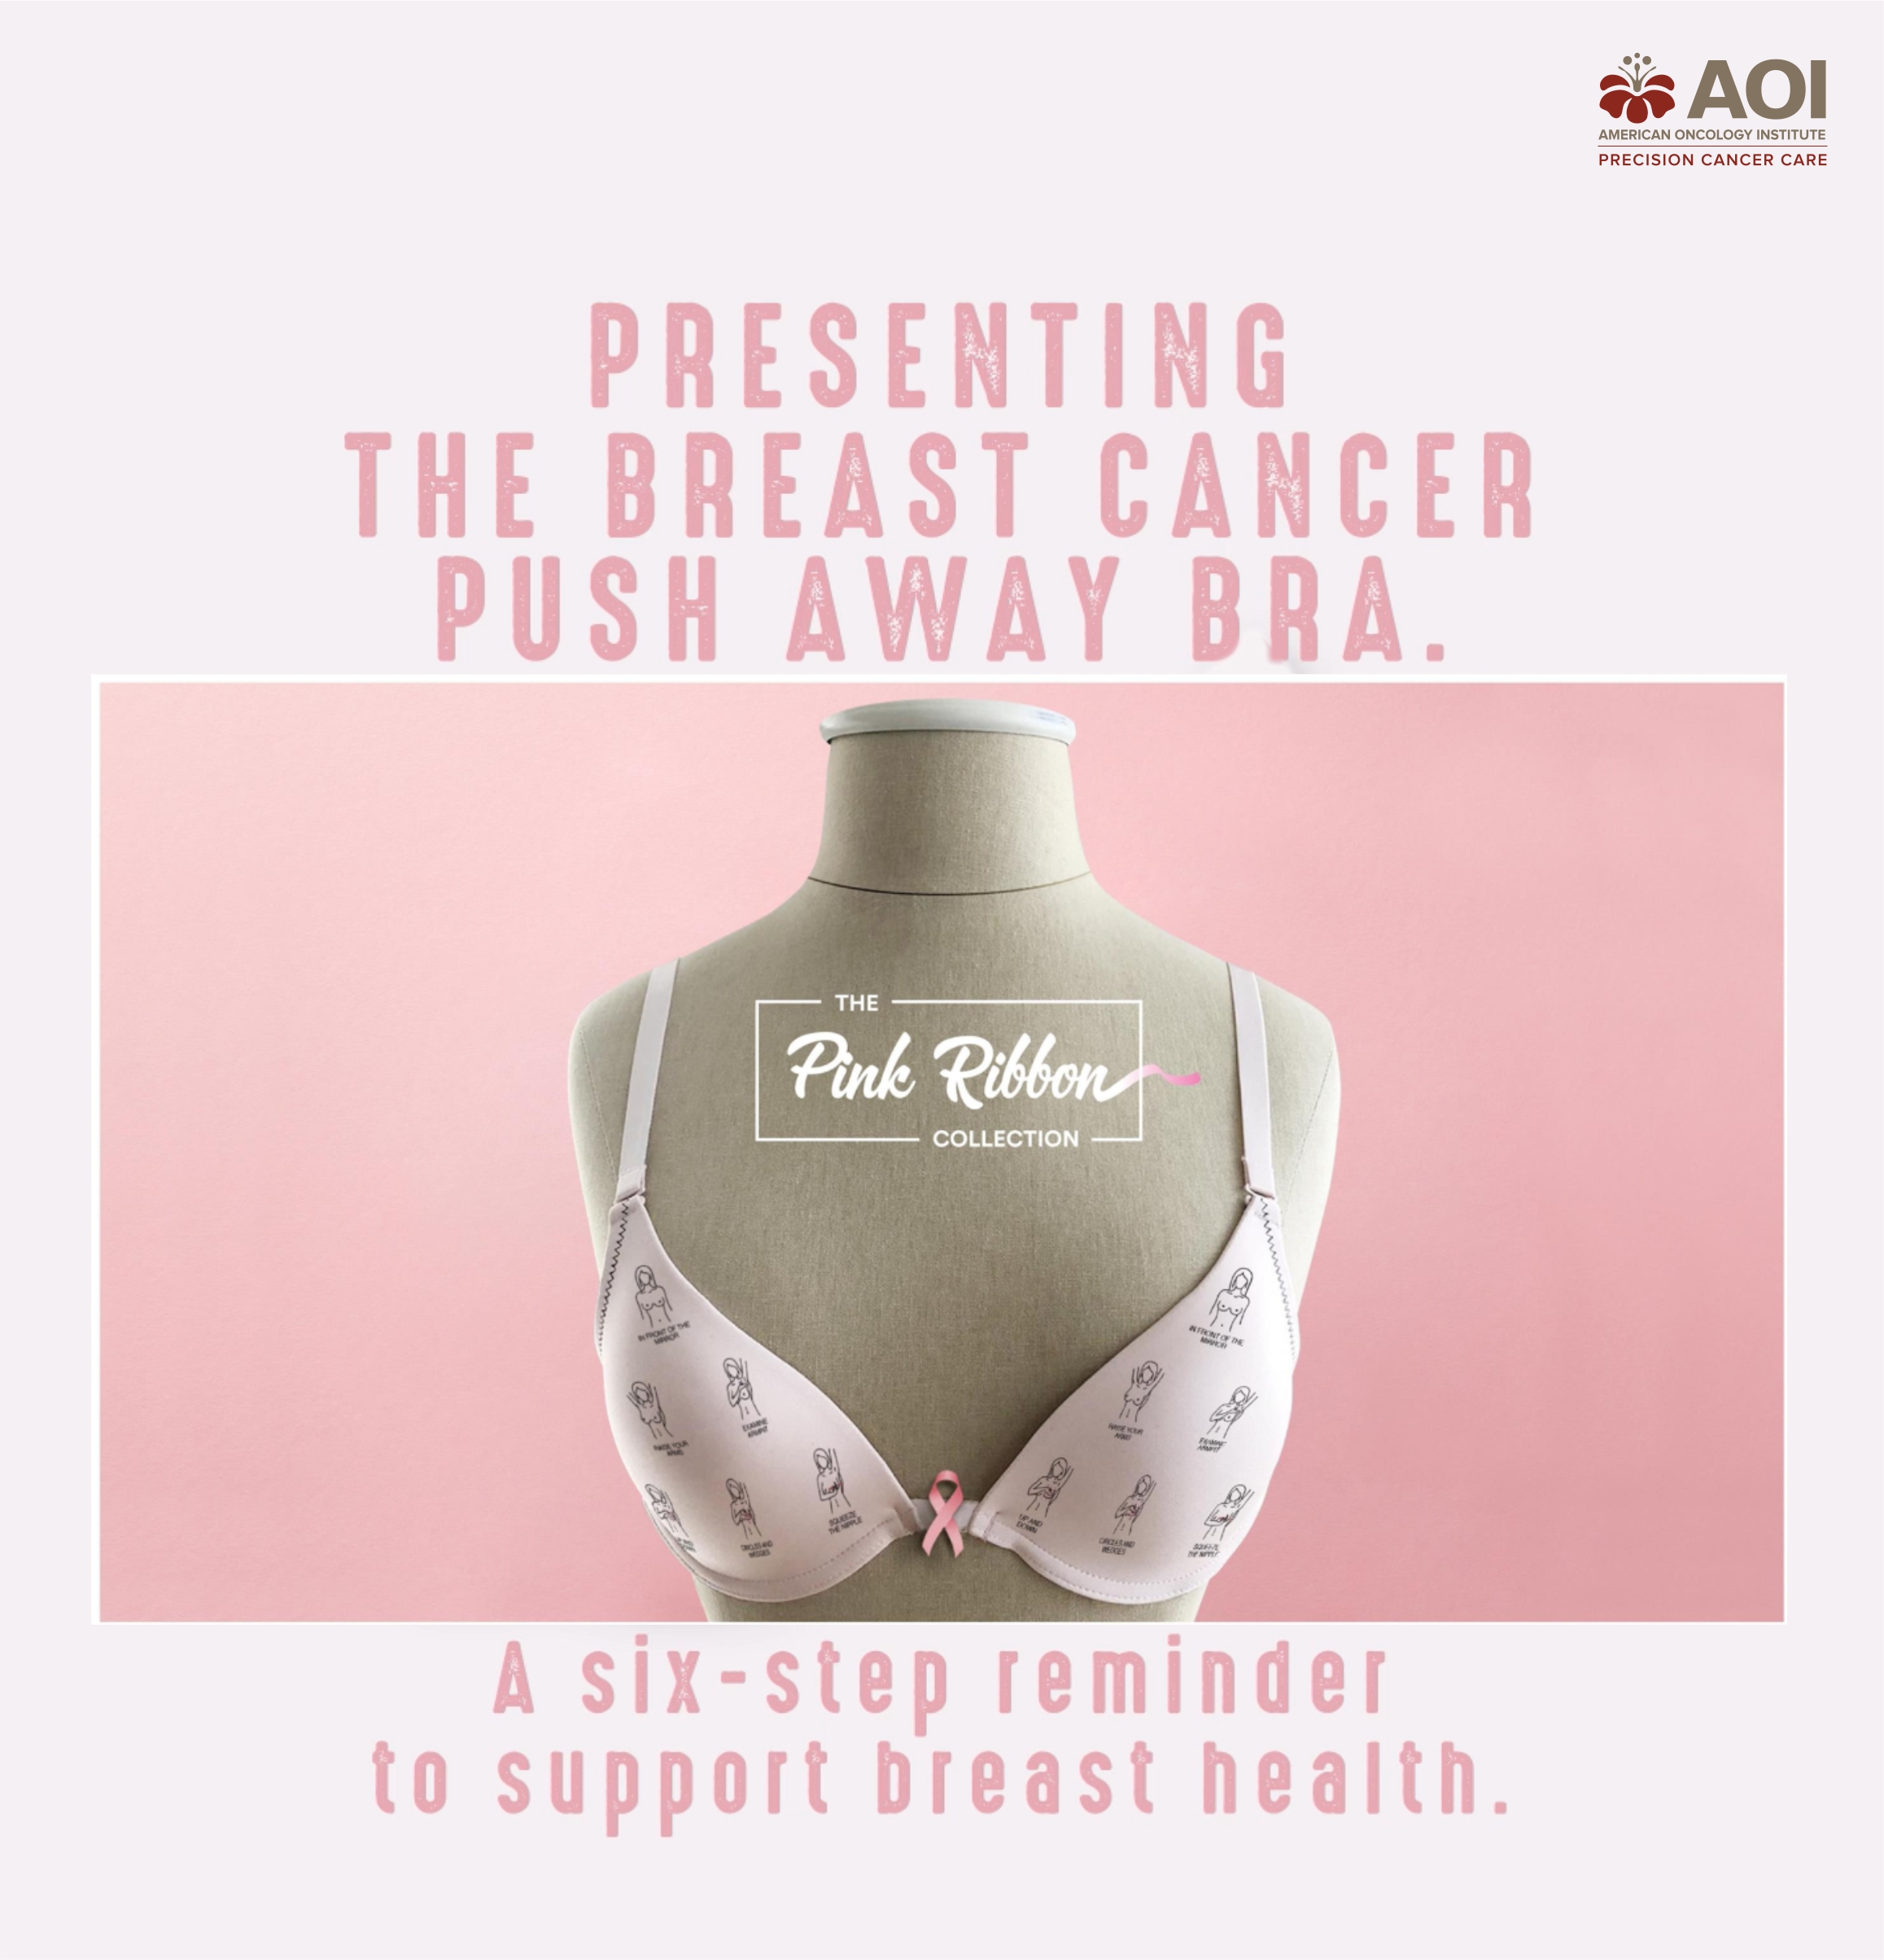 American Oncology Institute (AOI) starts a dialogue on Self-Breast  Examination through #ThePinkRibbonCollection